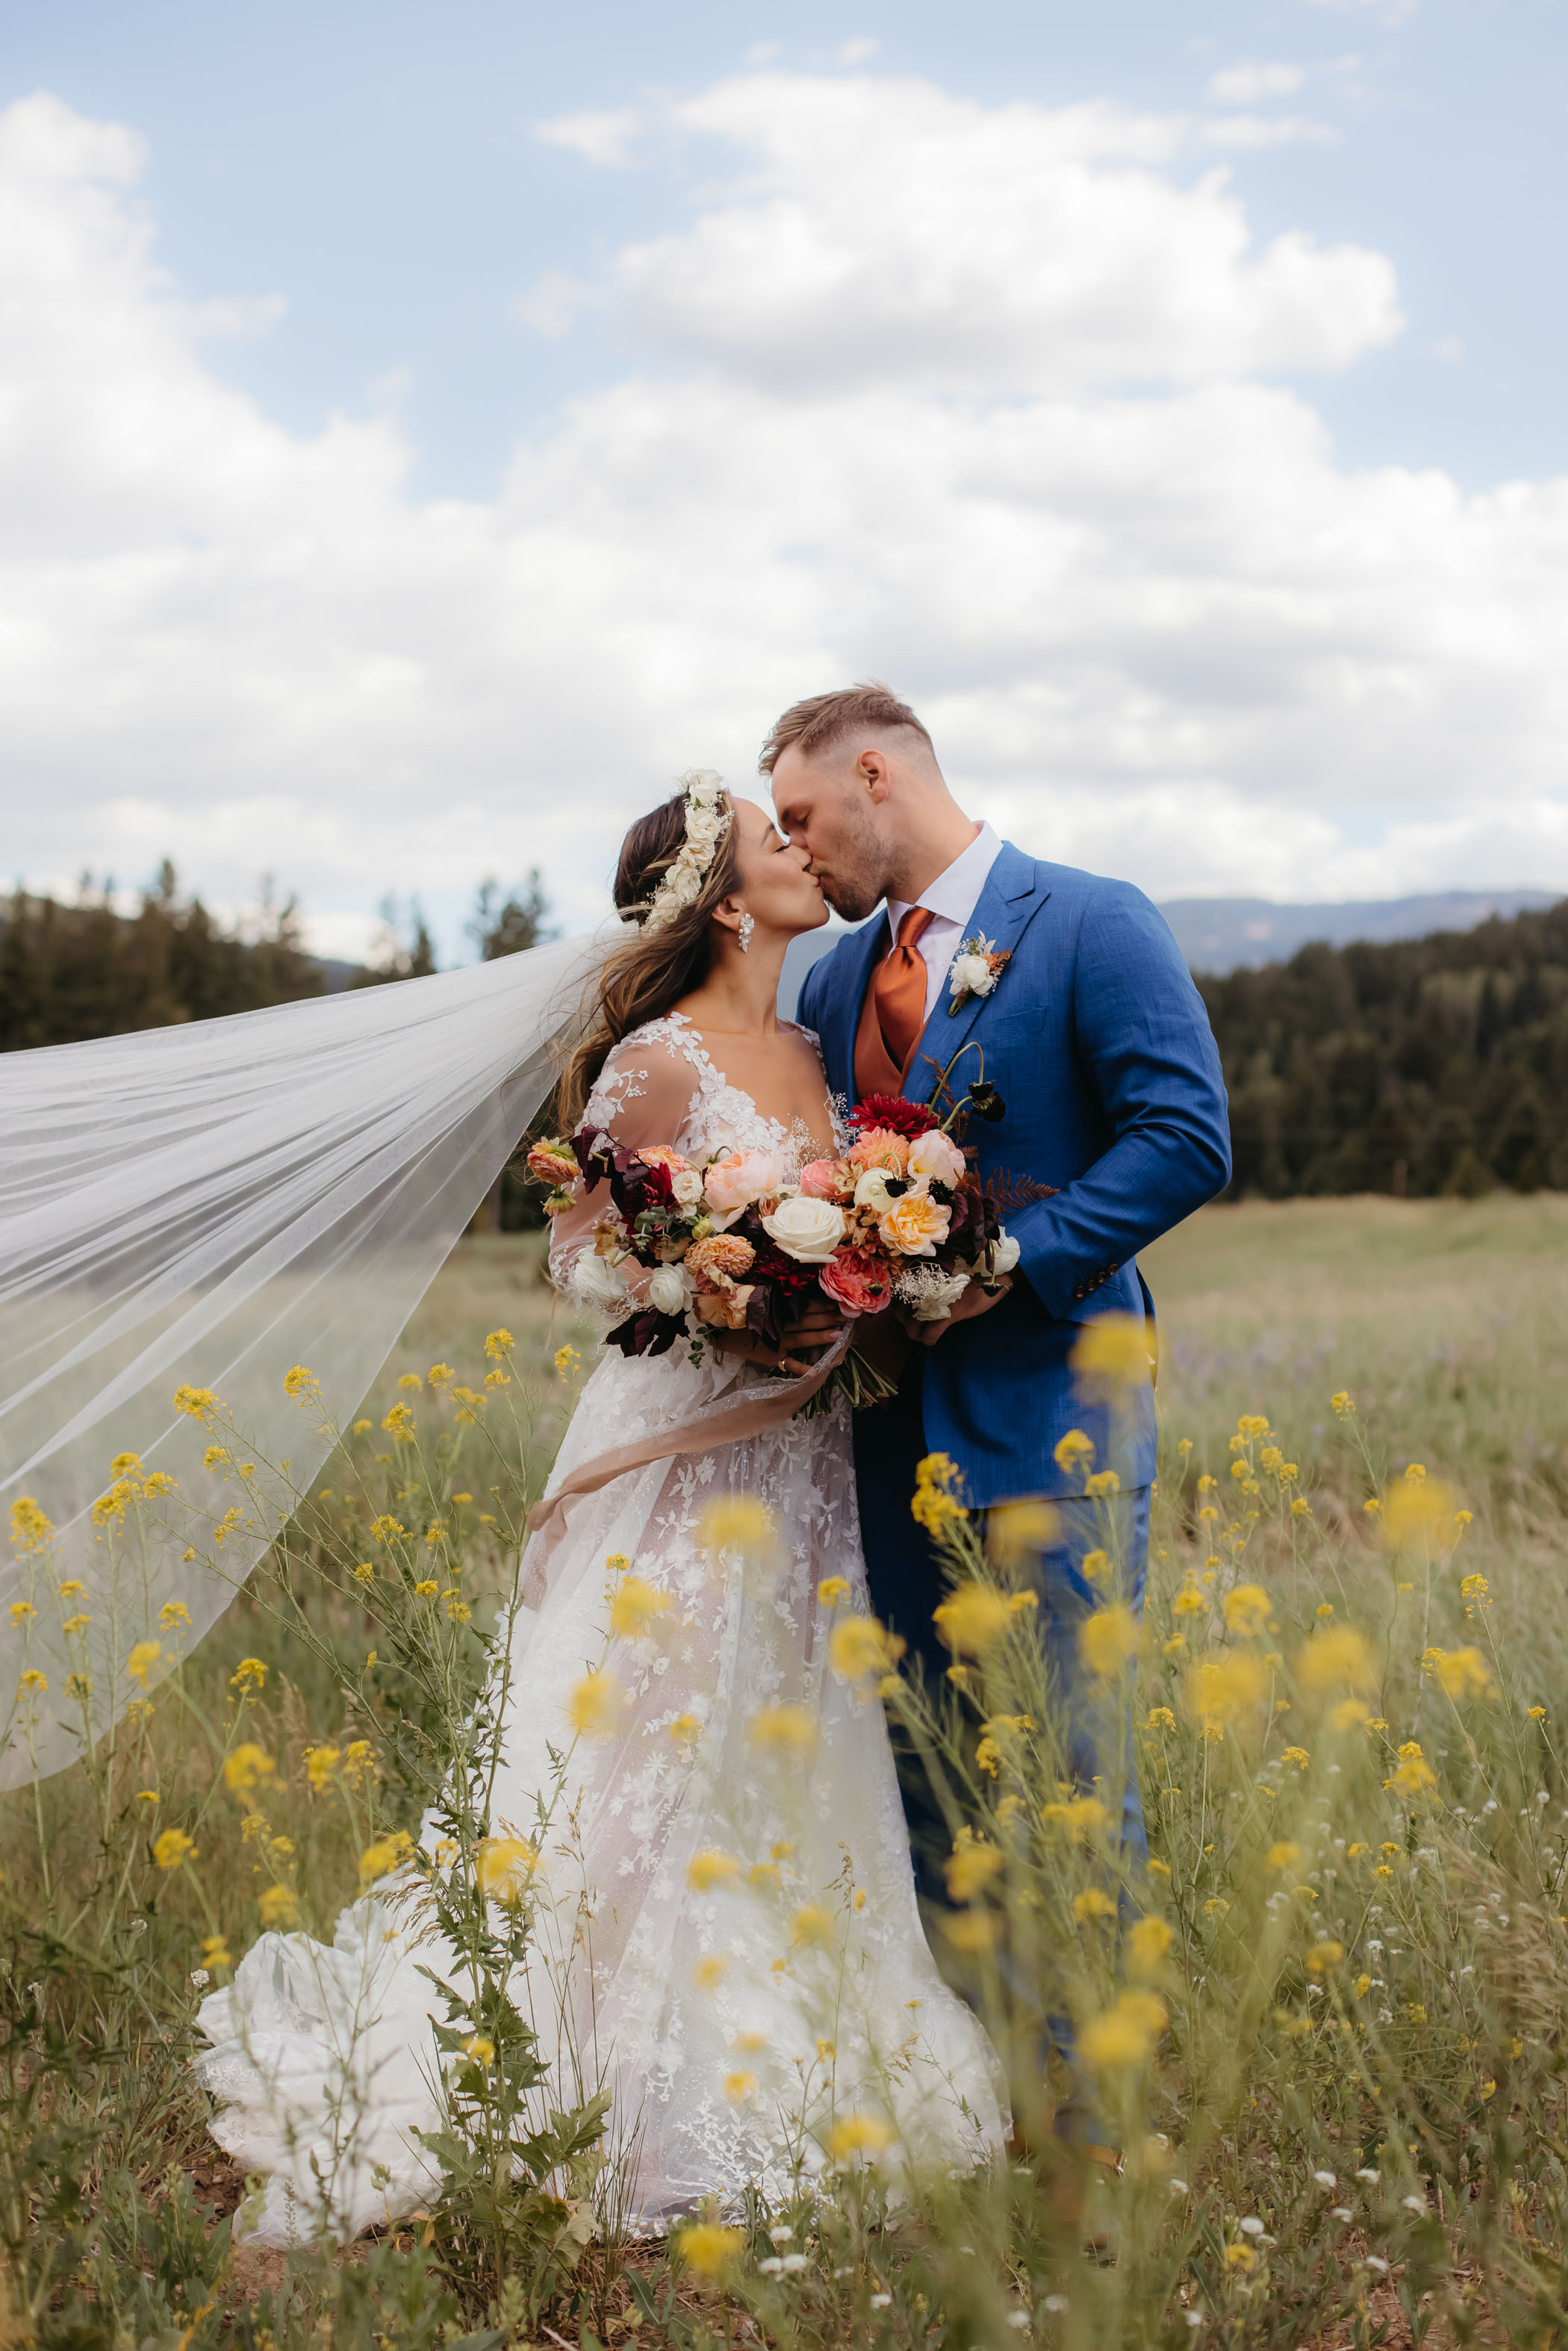 A Rustic, Romantic Wedding Surrounded by Mountains in Big Sky, Montana